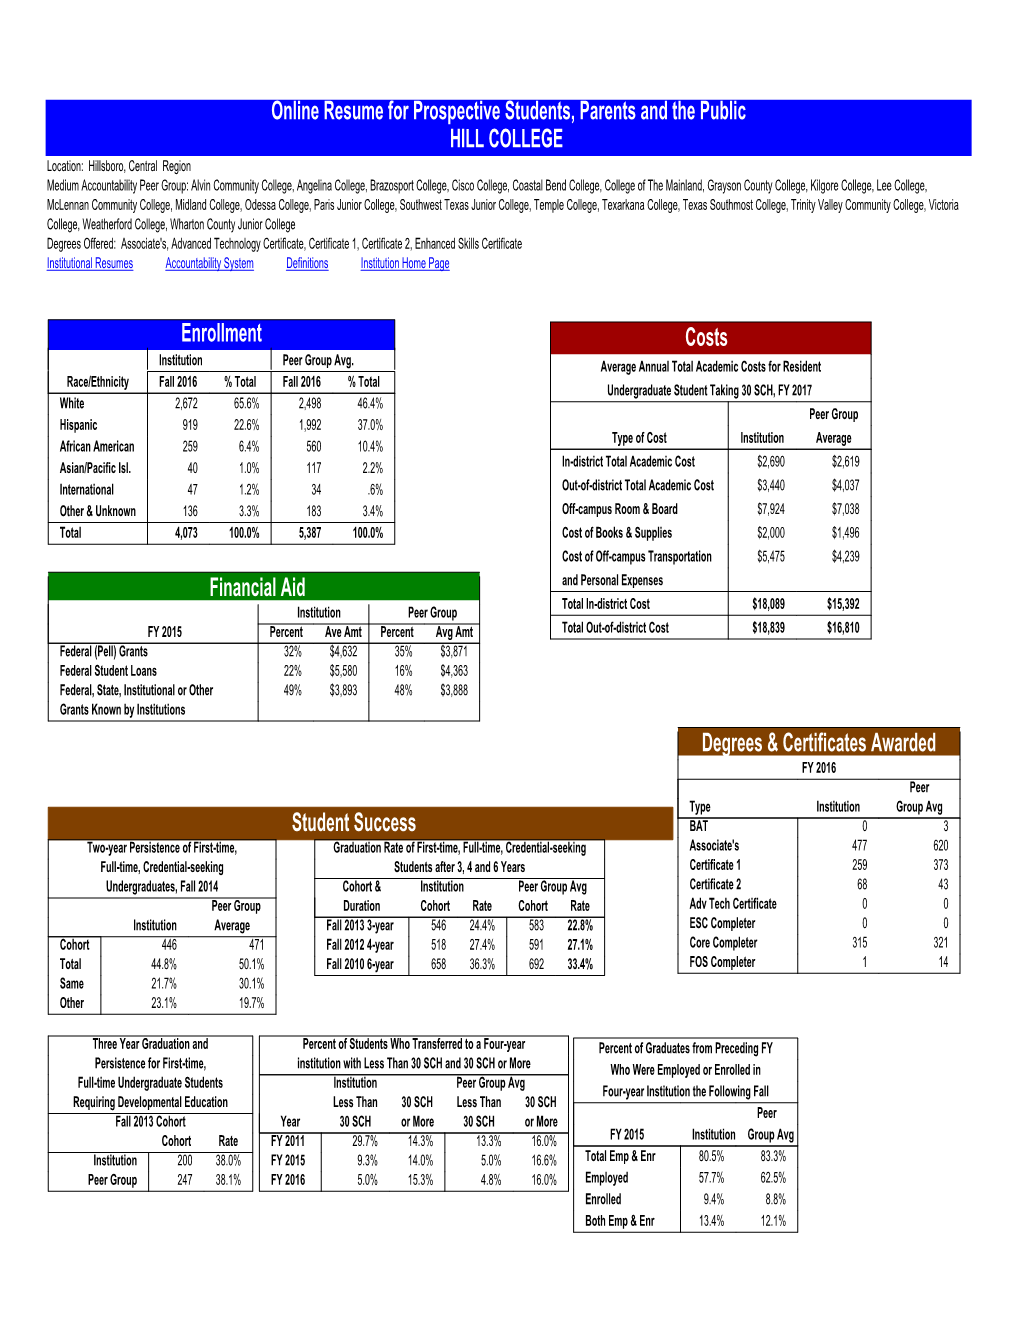 Student Success Online Resume for Prospective Students